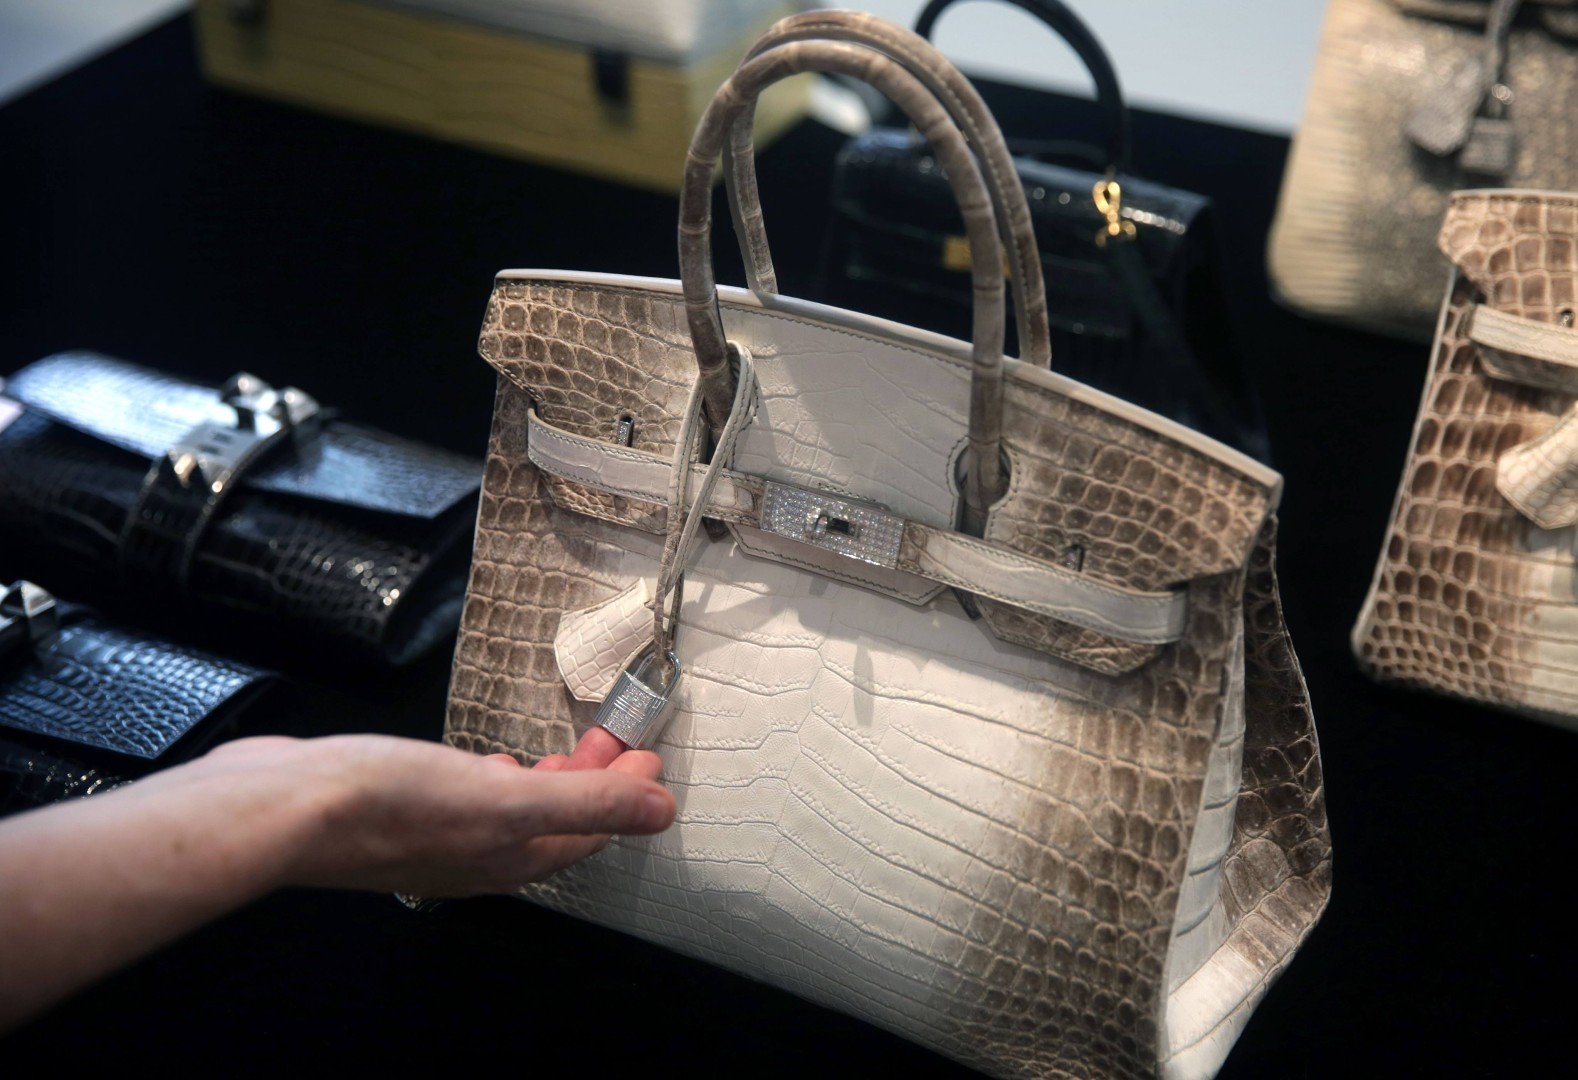 The Top 6 Most Expensive Hermès Birkin Bags  Handbags and Accessories   Sothebys